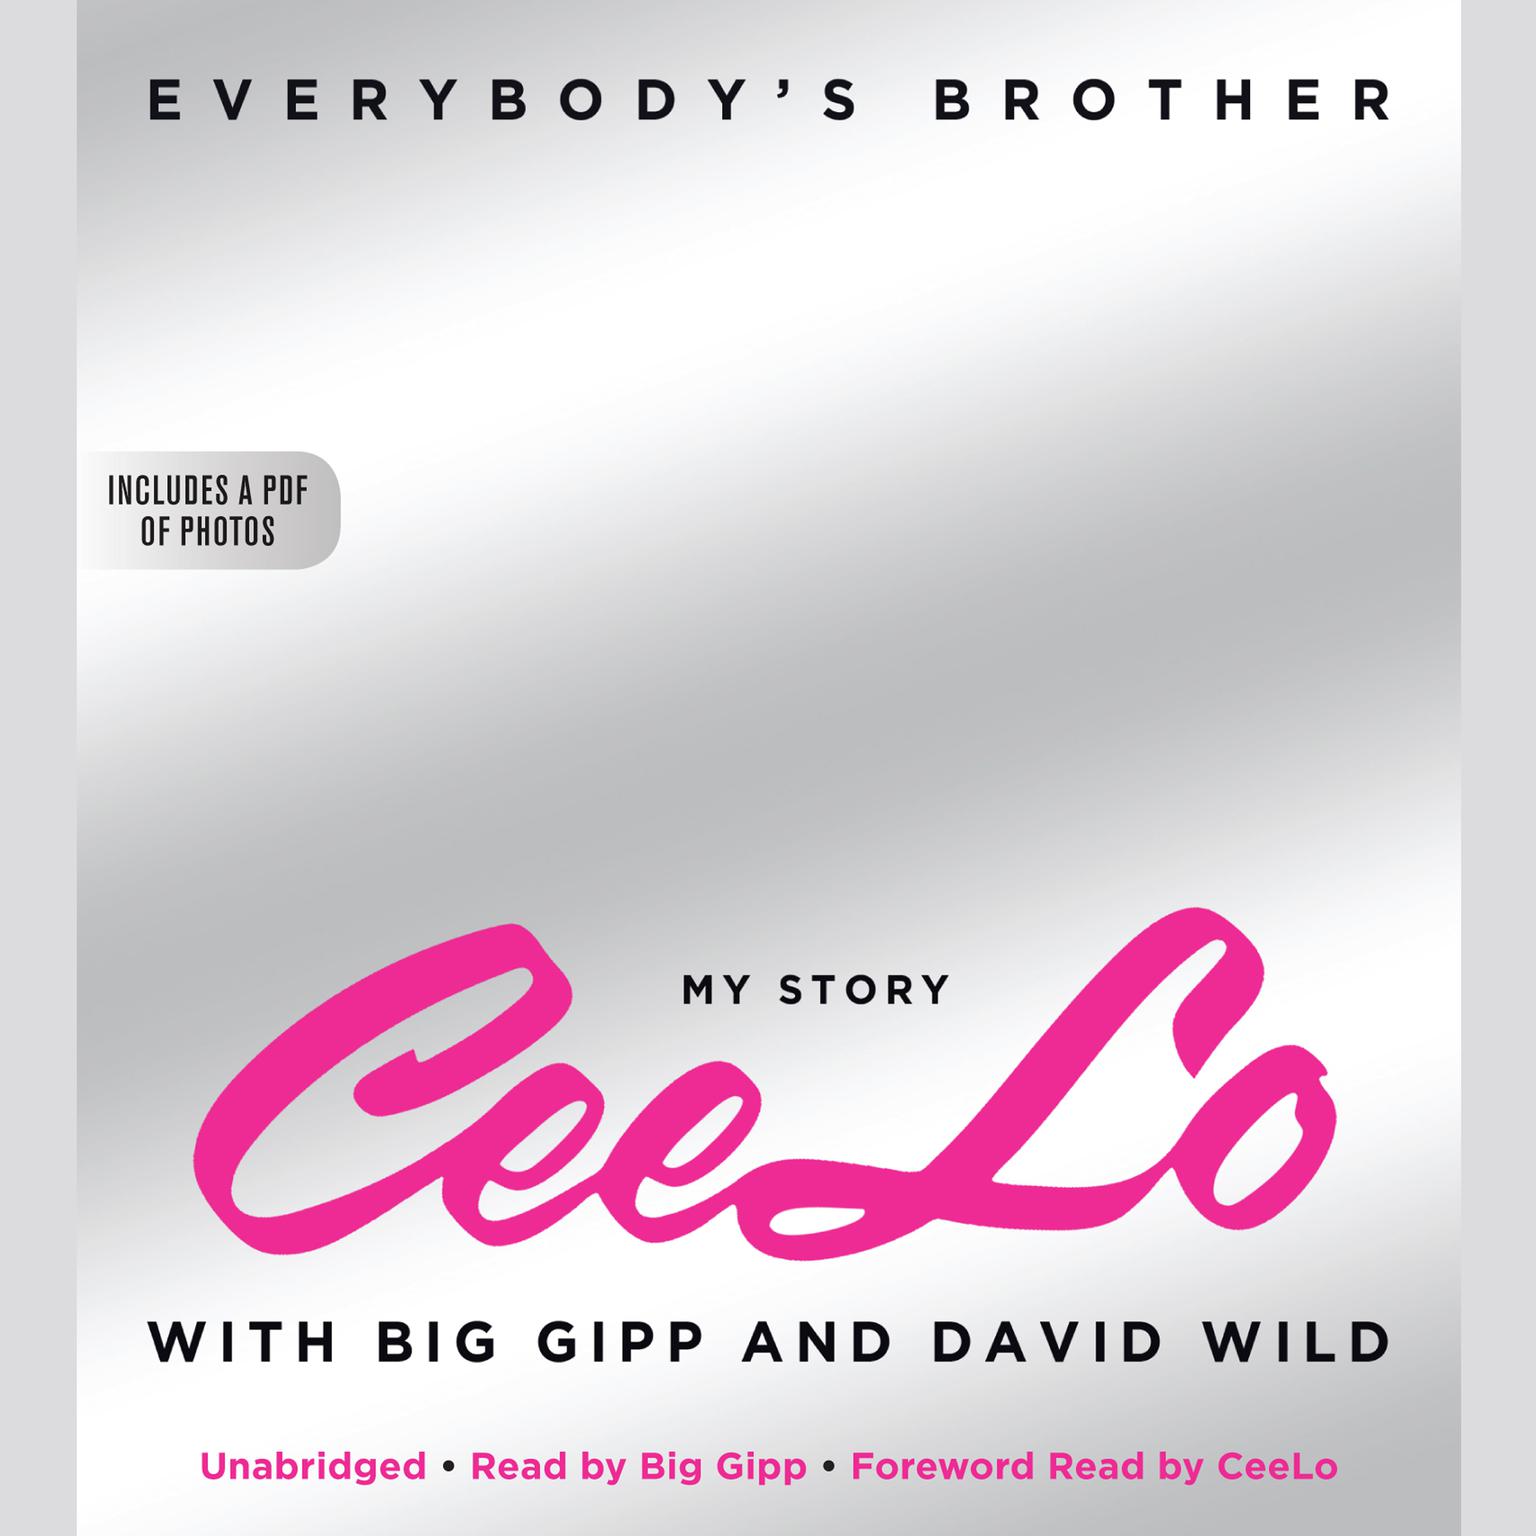 Everybodys Brother: My Story: CeeLo, with Big Gipp and David Wild Audiobook, by CeeLo Green